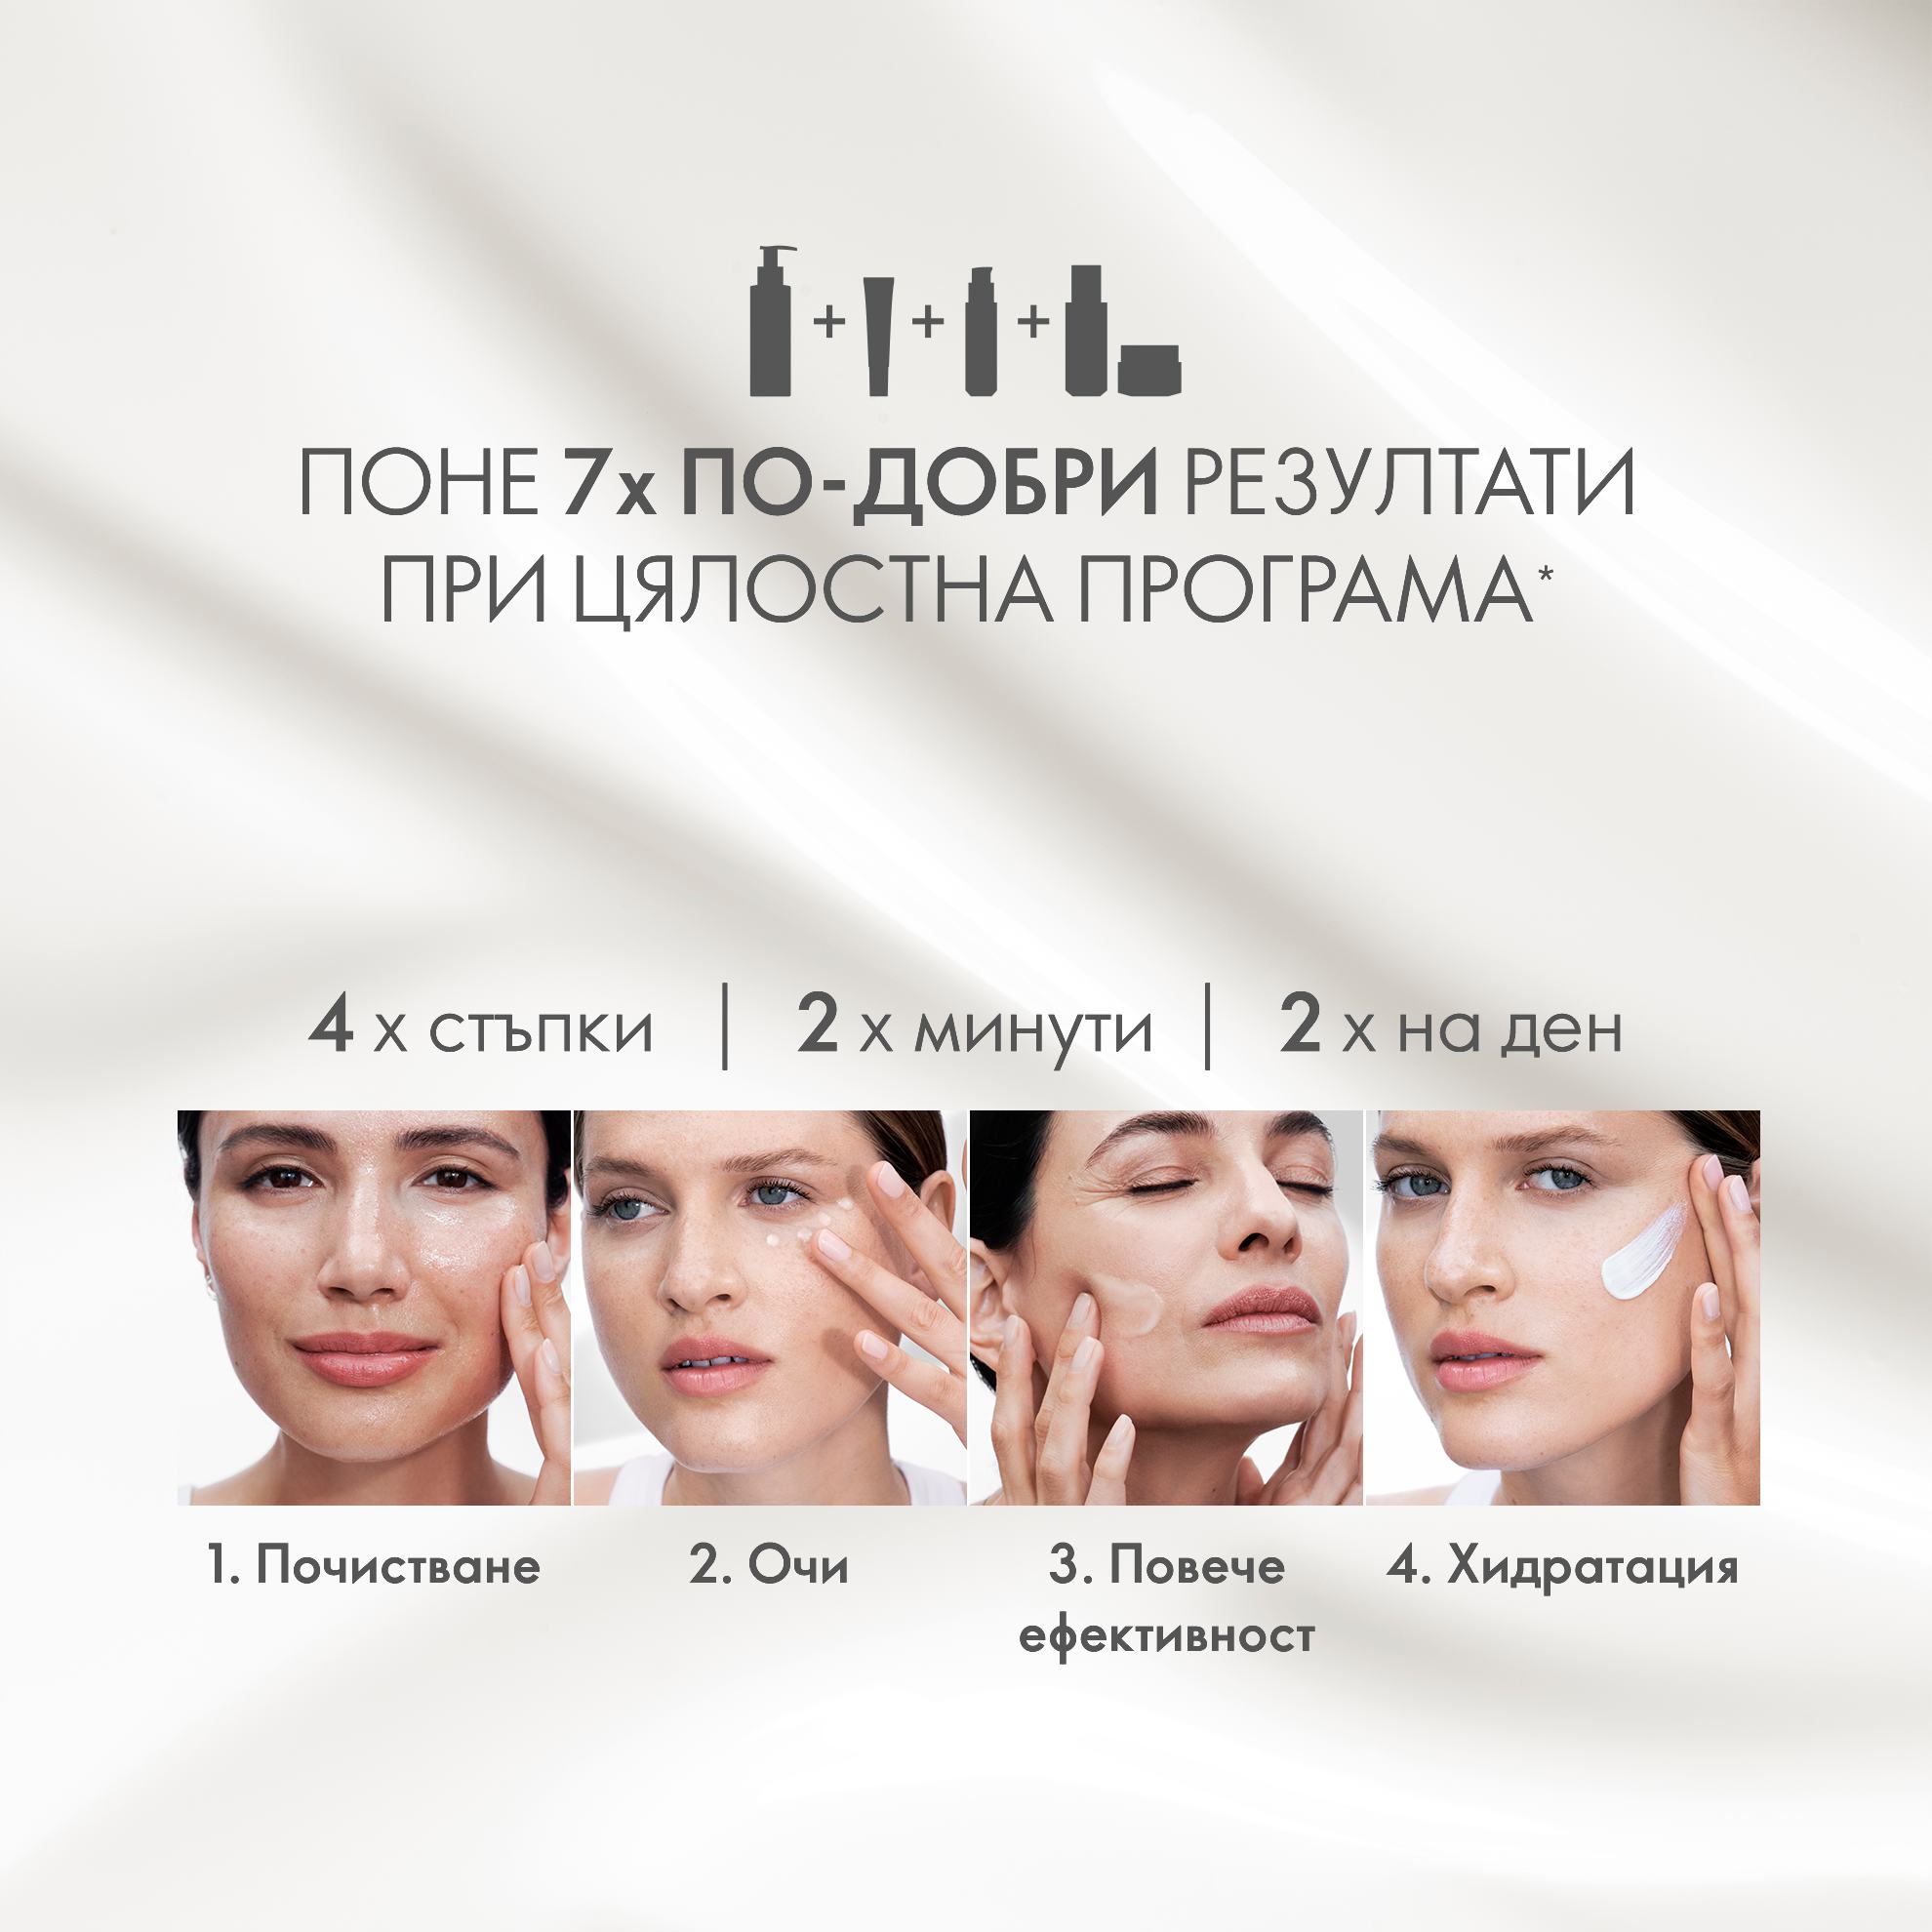 https://media-cdn.oriflame.com/productImage?externalMediaId=product-management-media%2fProducts%2f45608%2fBG%2f45608_5.png&id=17573086&version=1